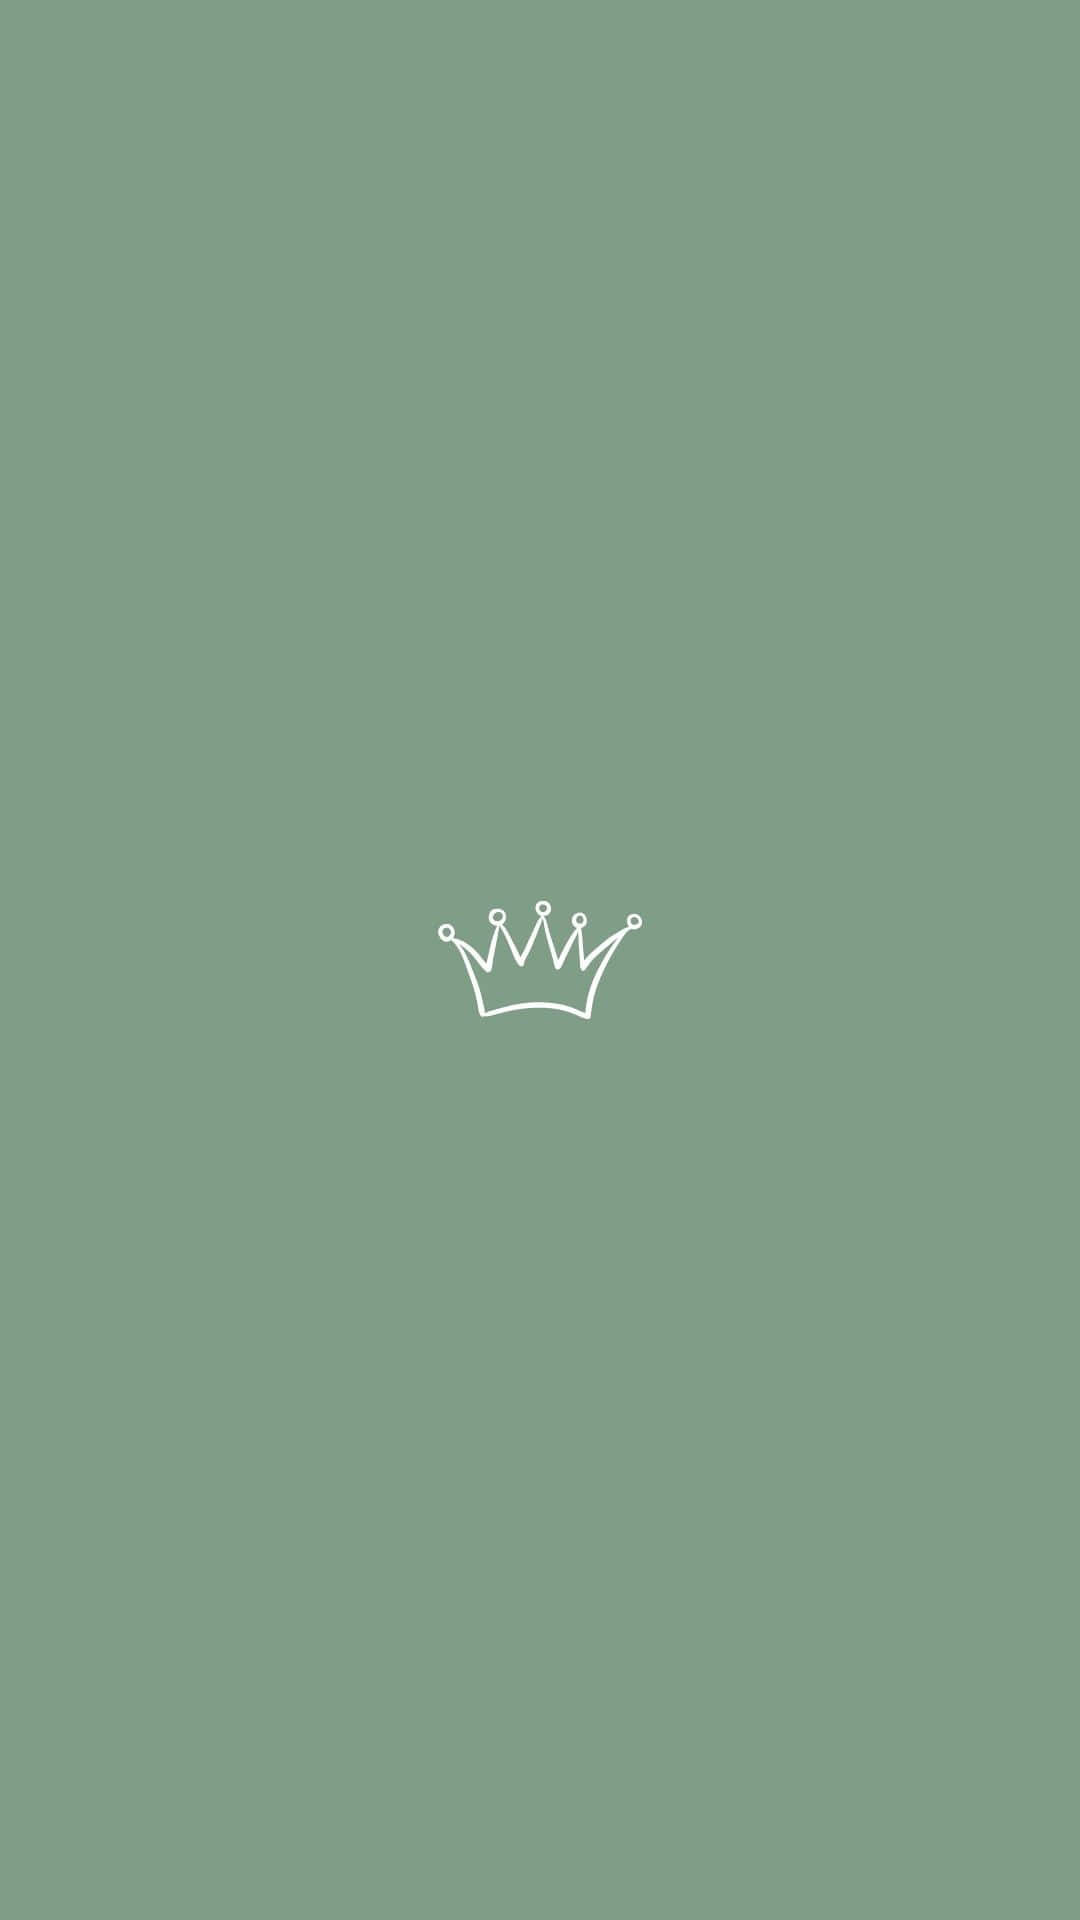 A Crown Logo On A Green Background Wallpaper